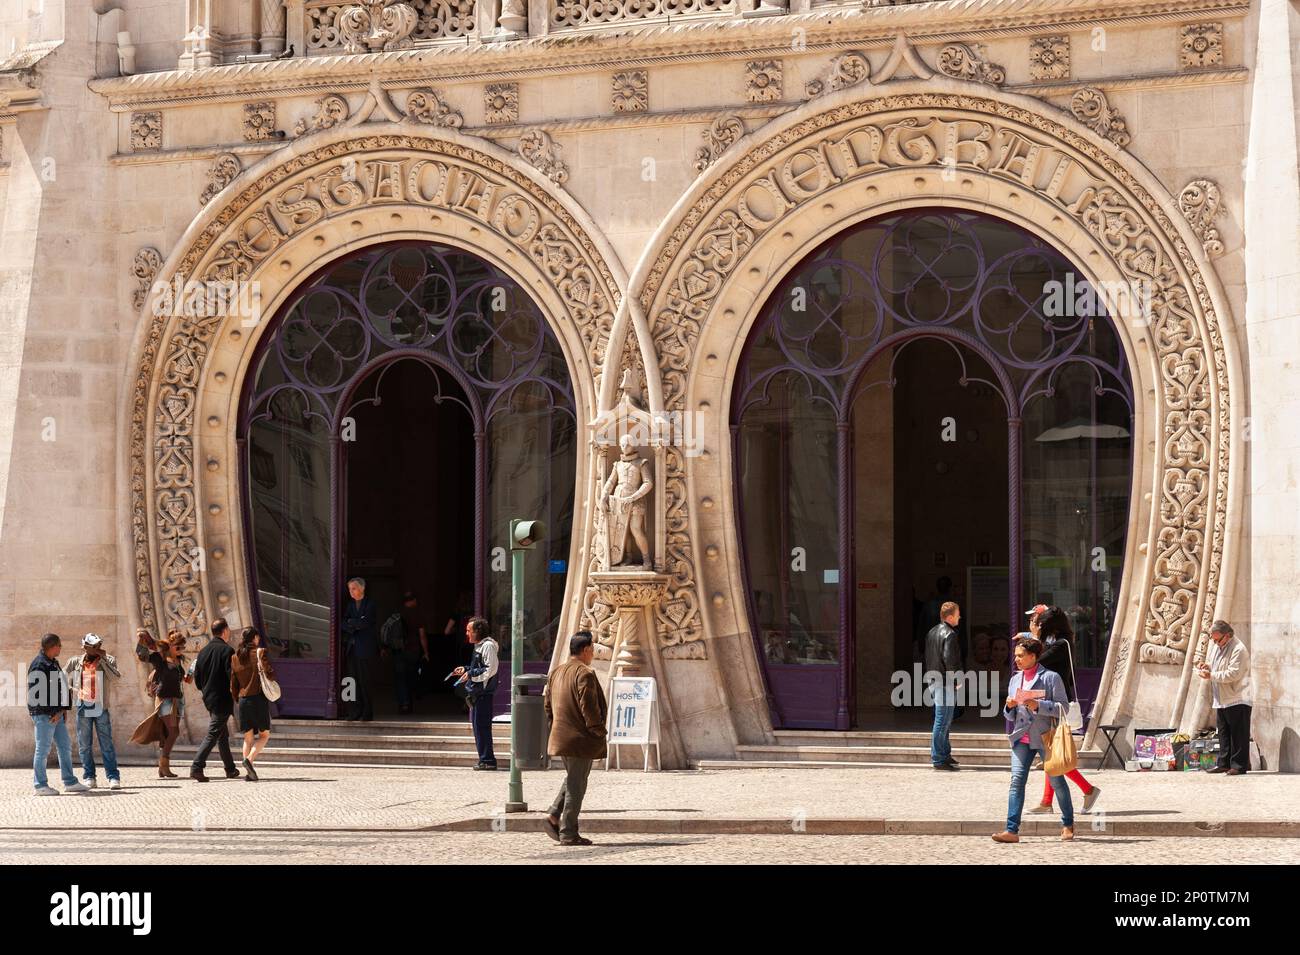 Entrance to Rossio Railway Station, Lisbon, Portugal Stock Photo